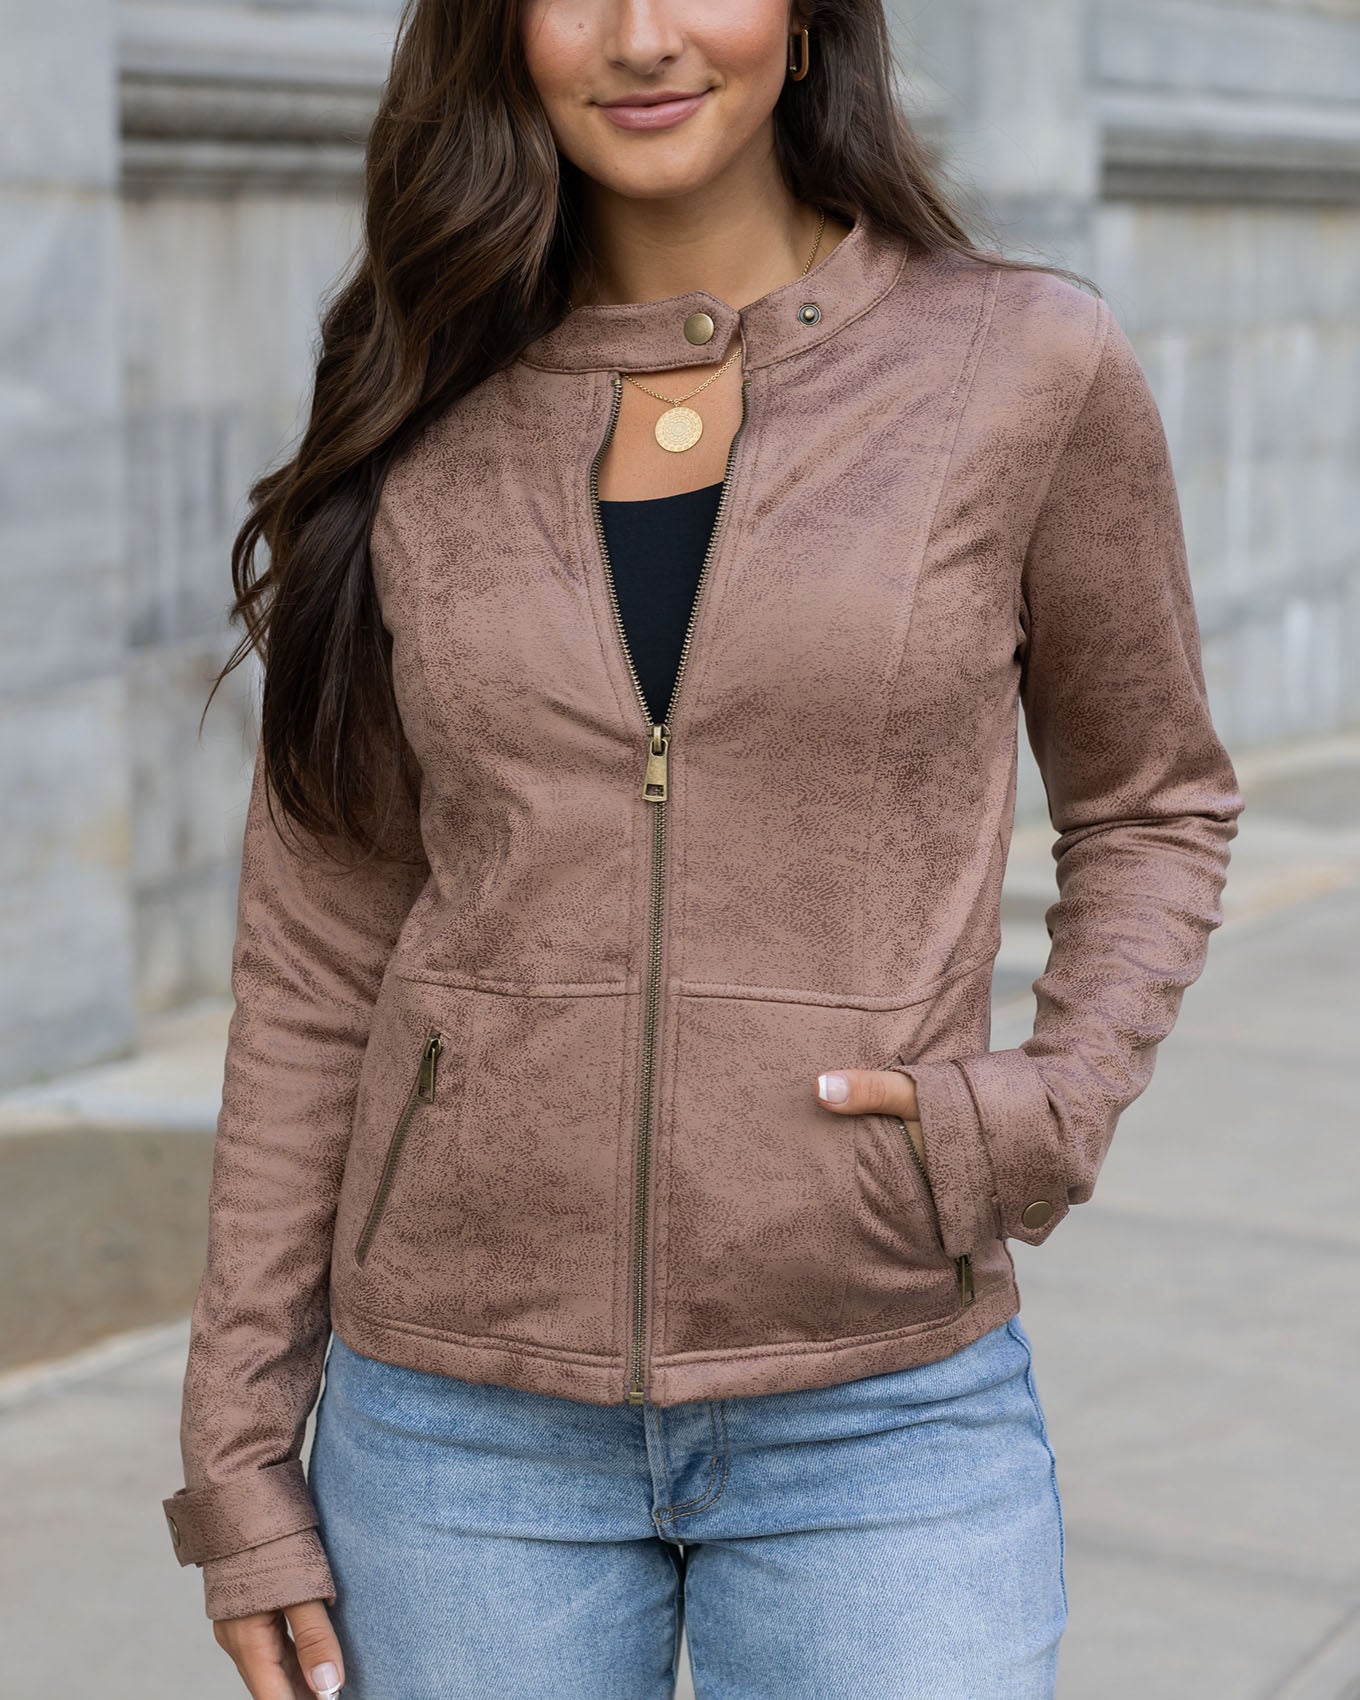 Ultimate Guide To The Best Fleece Pullovers & Jackets - Katie's Bliss